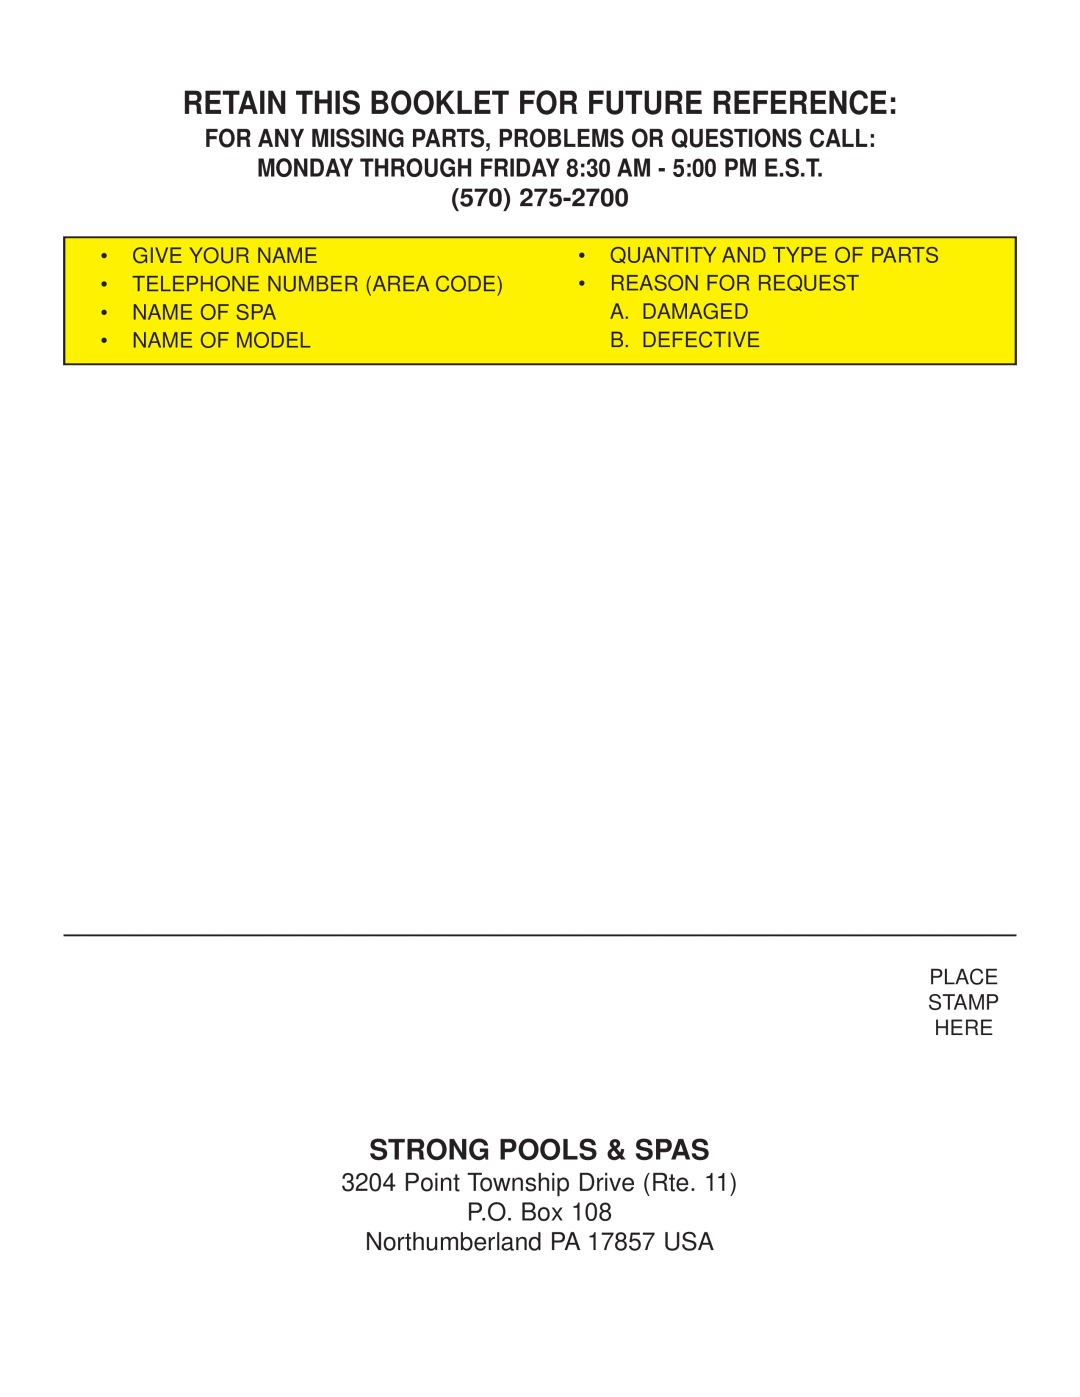 Strong Pools and Spas Madrid Retain This Booklet For Future Reference, For Any Missing Parts, Problems Or Questions Call 